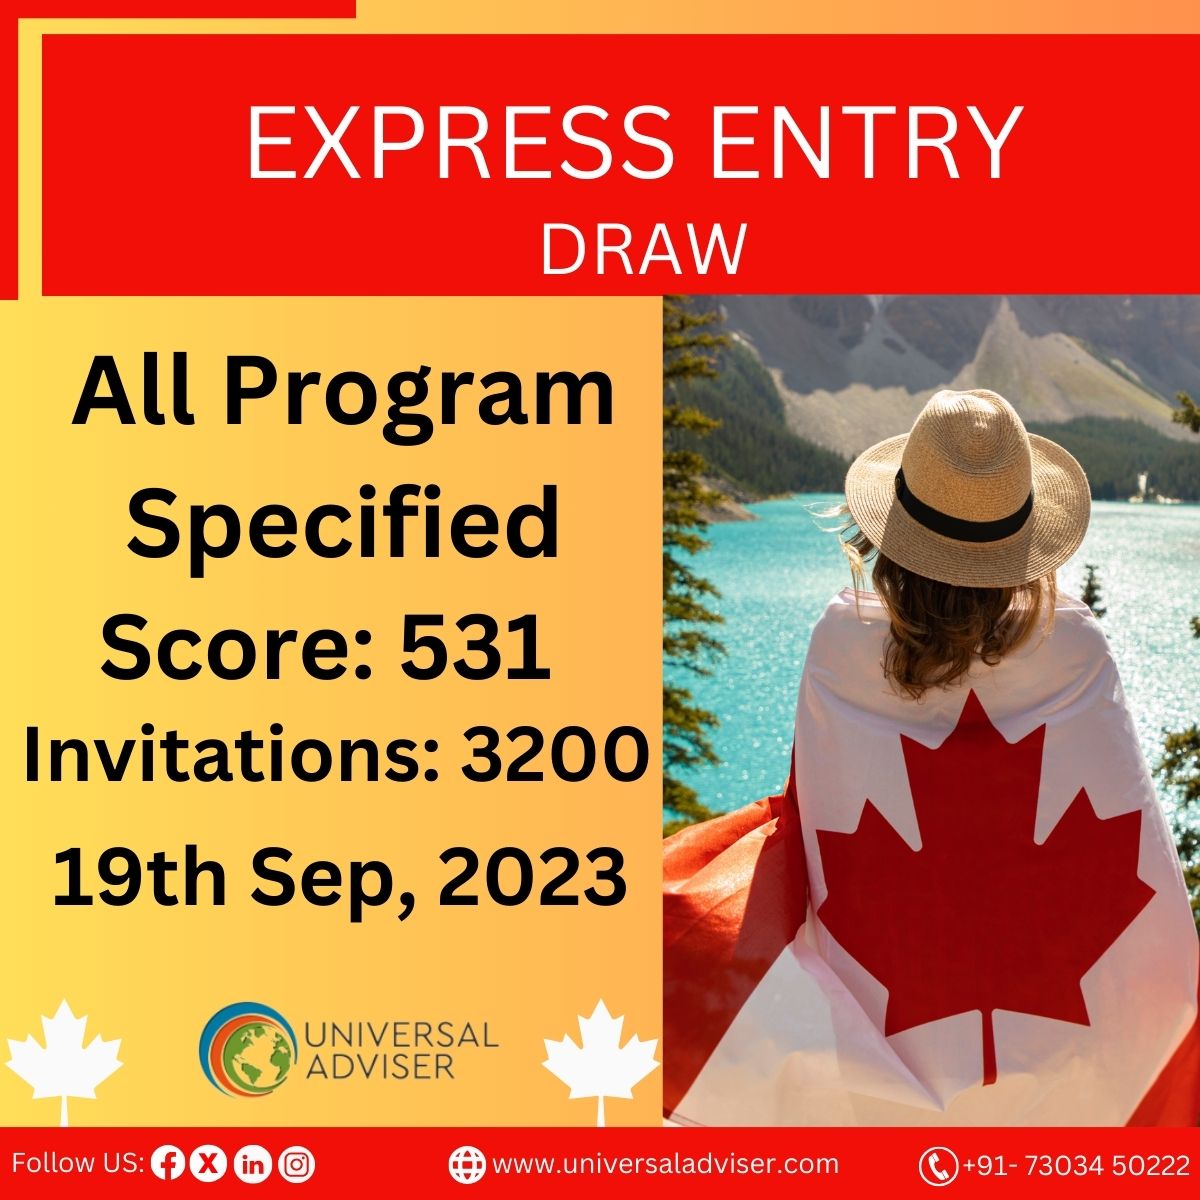 CRS score drops to 447 in latest Express Entry Draw - Can X Immigration